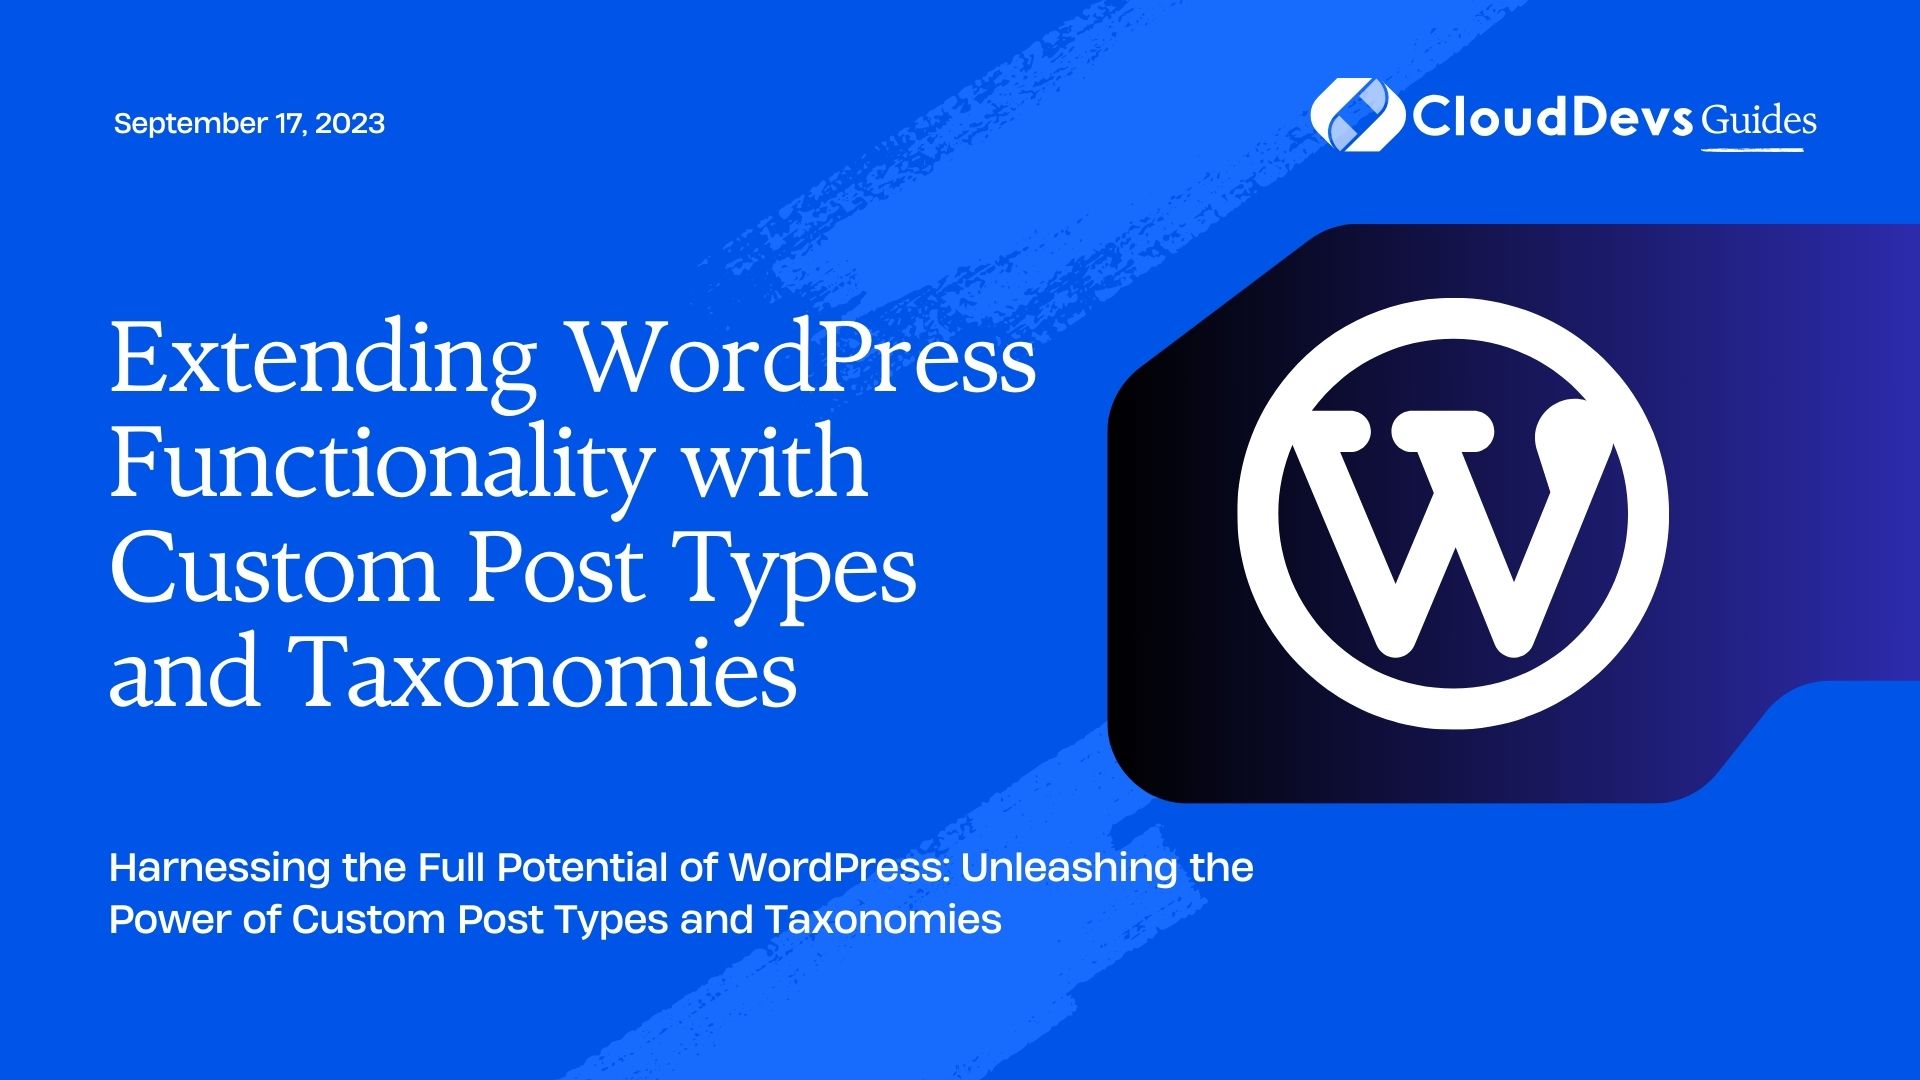 Extending WordPress Functionality with Custom Post Types and Taxonomies